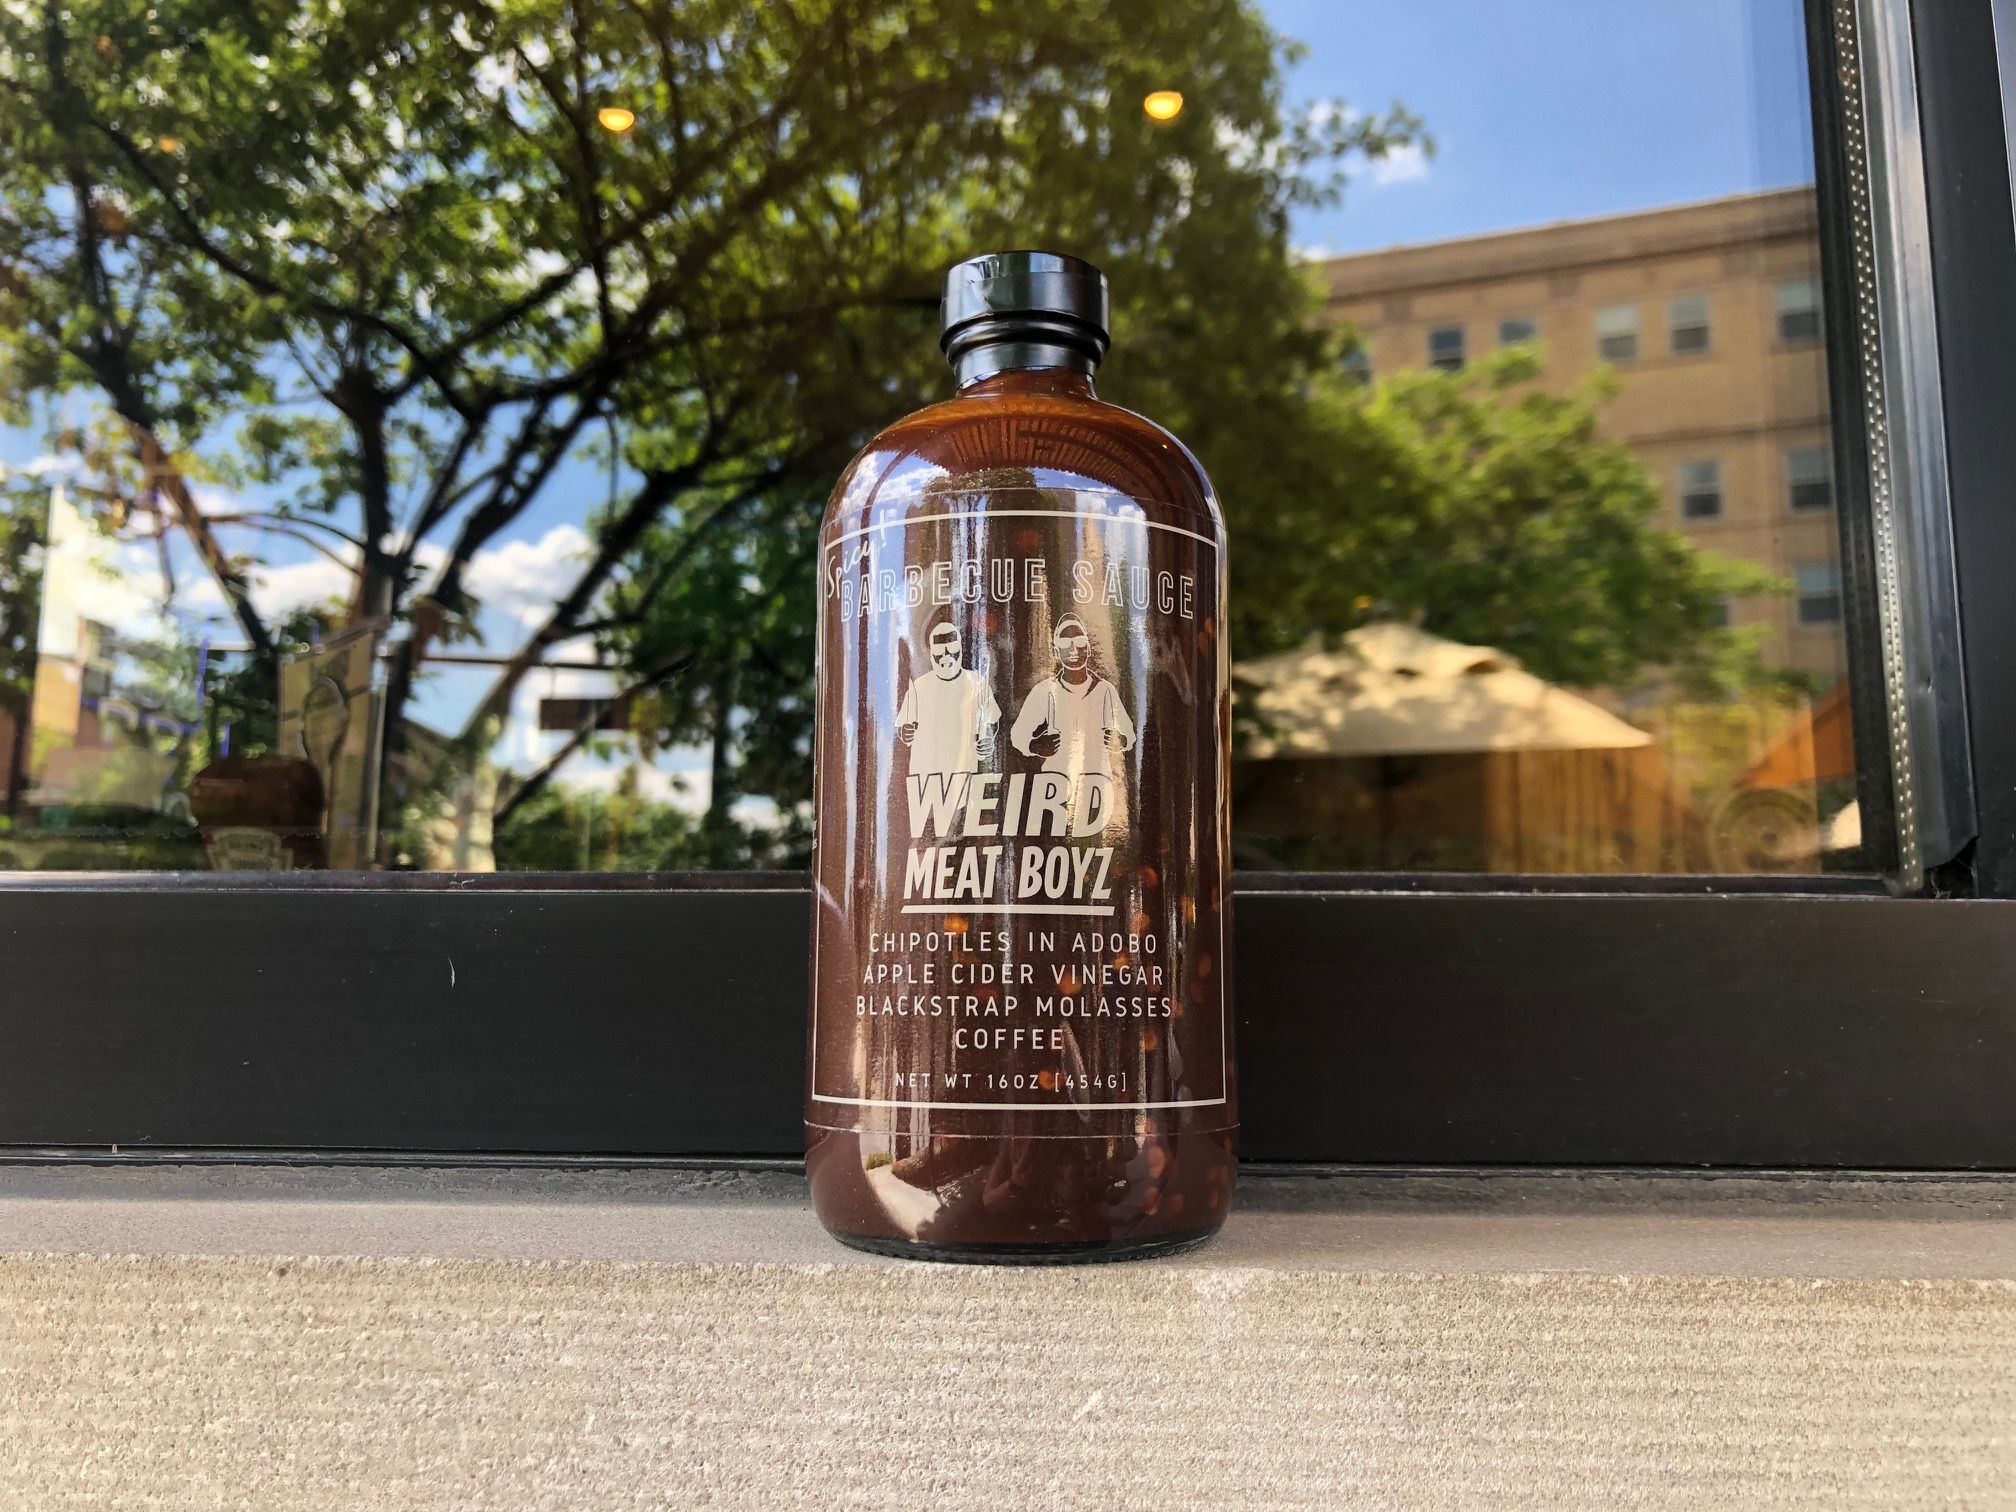 On a window ledge, a bottle of Weird Meat Boyz's BBQ sauce sits. In the window behind the bottle, there is a reflection of Downtown Champaign's trees and a bright blue sky. Photo by Alyssa Buckley.